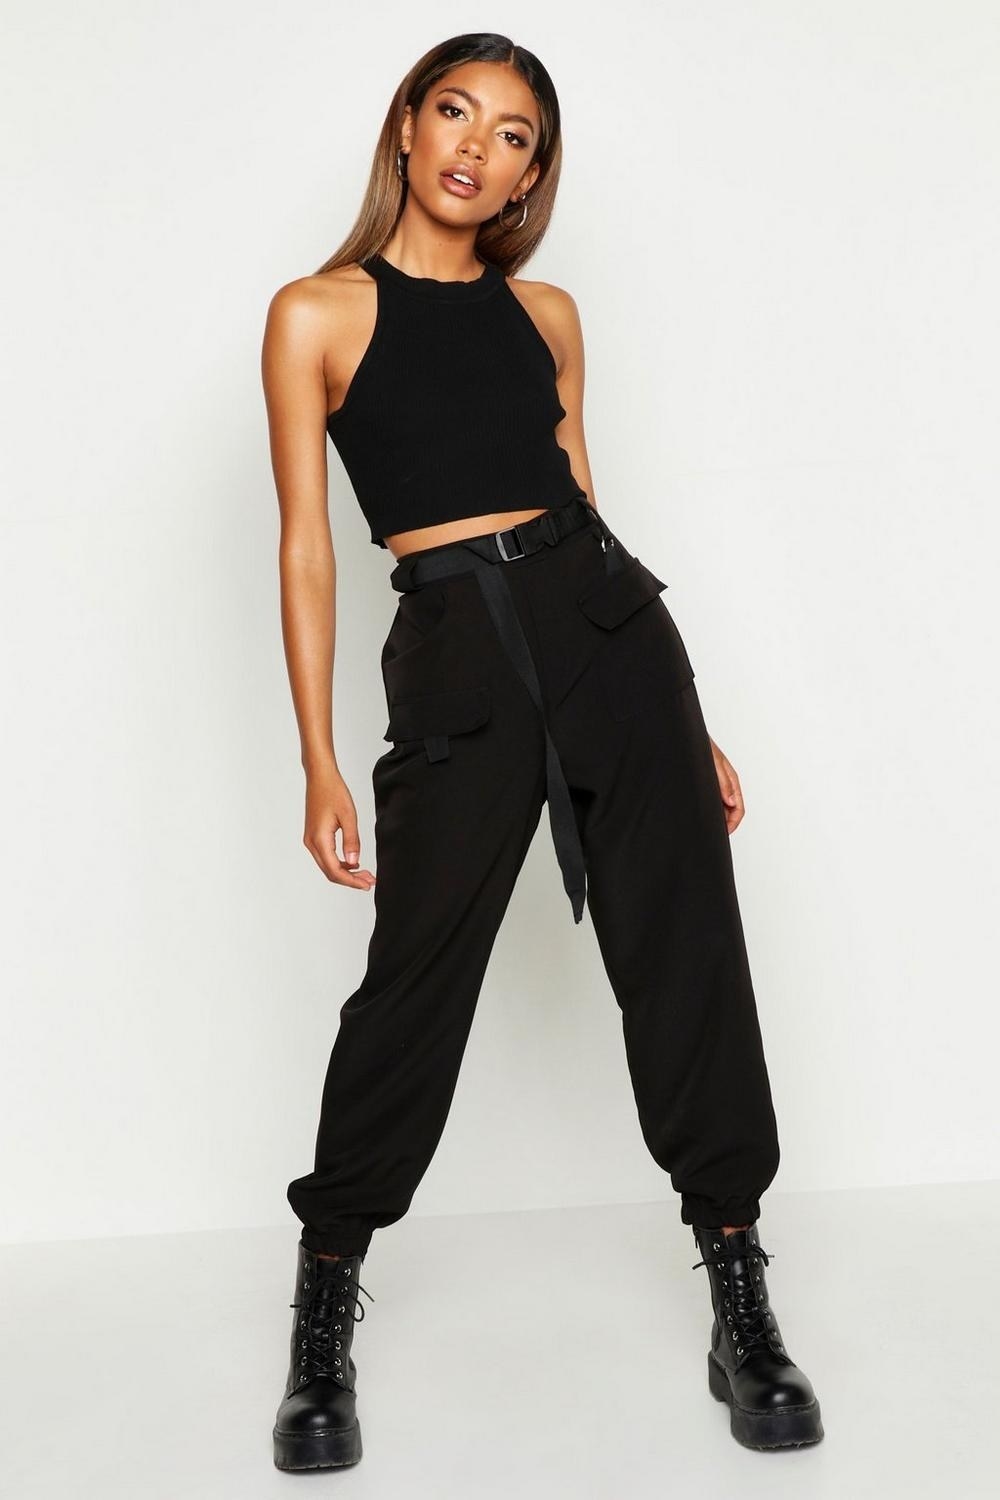 14 Things To Revamp Your Wardrobe That You Can Now Buy On Sale At Boohoo